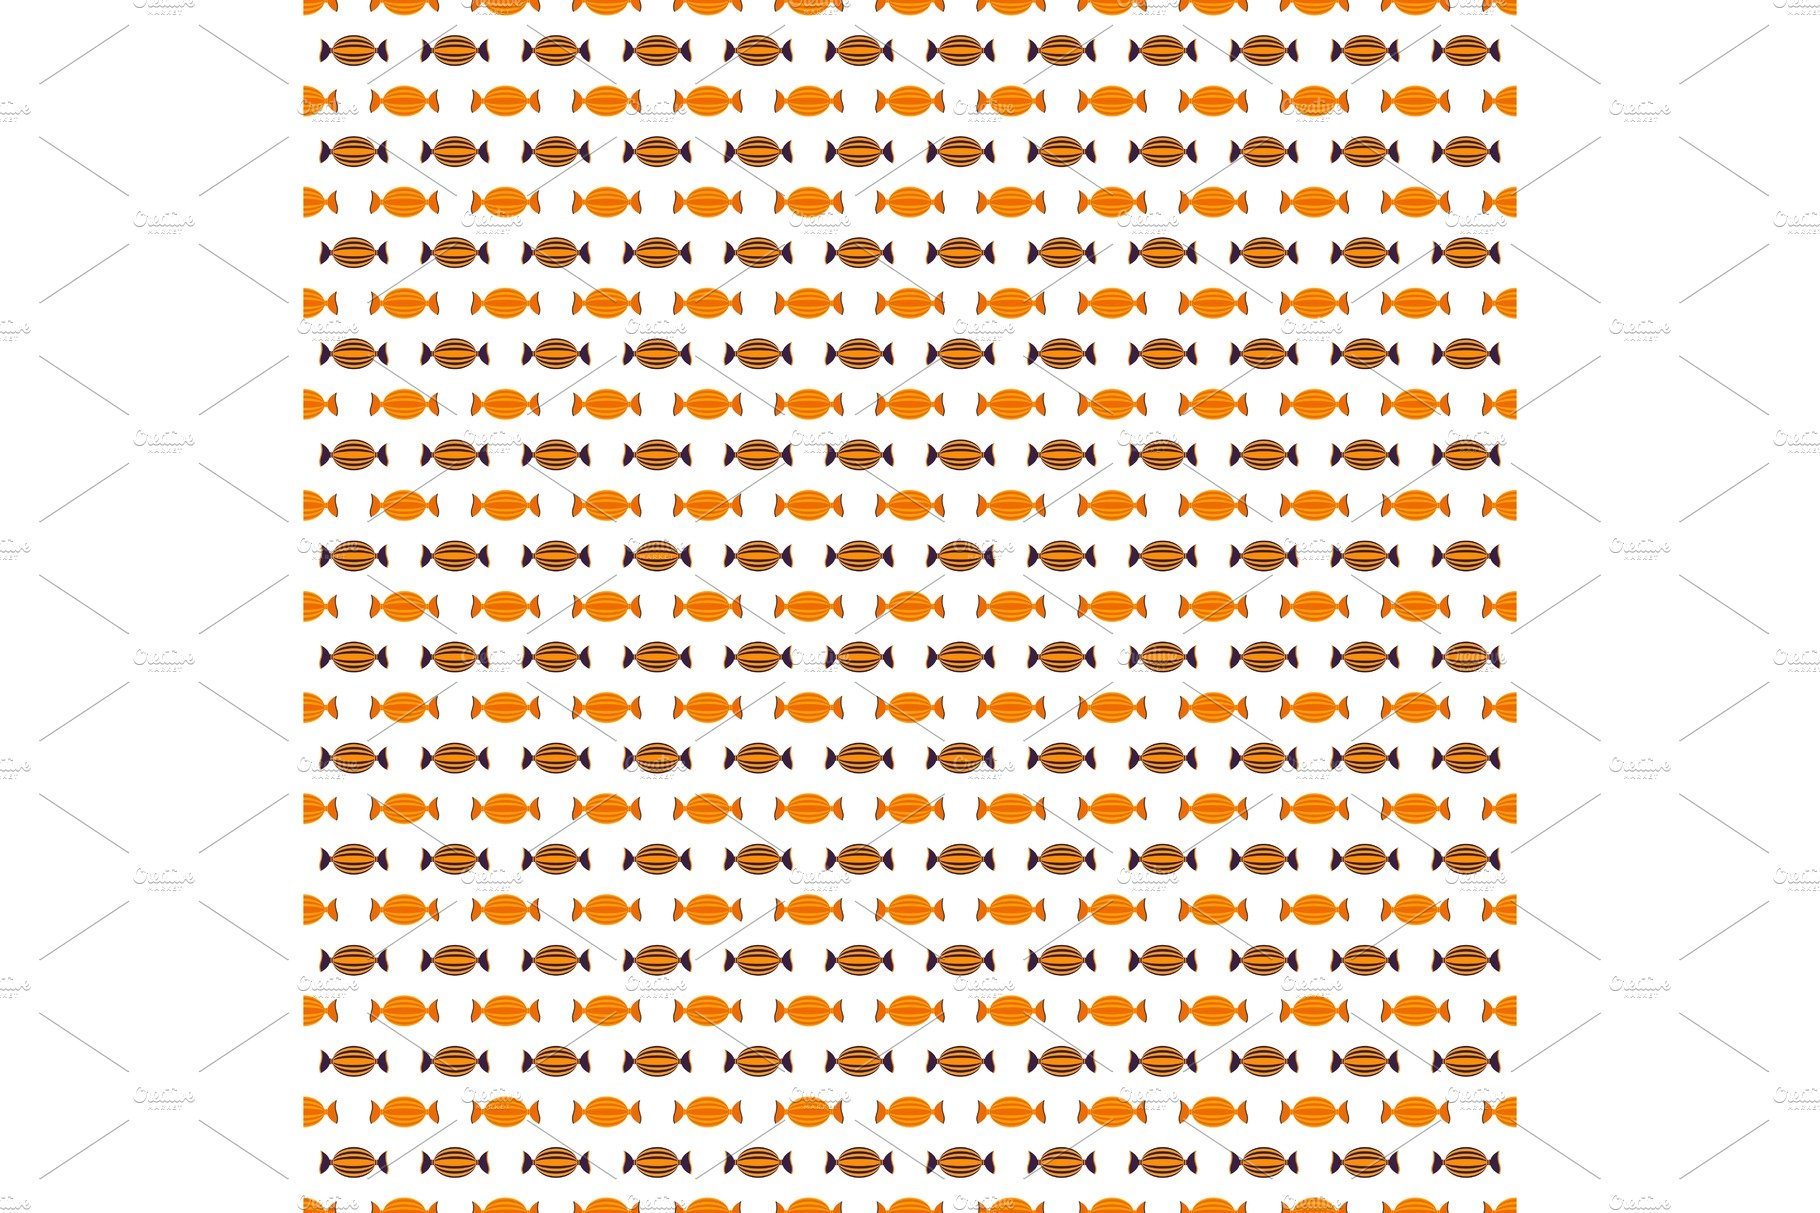 Halloween candy seamless pattern cover image.